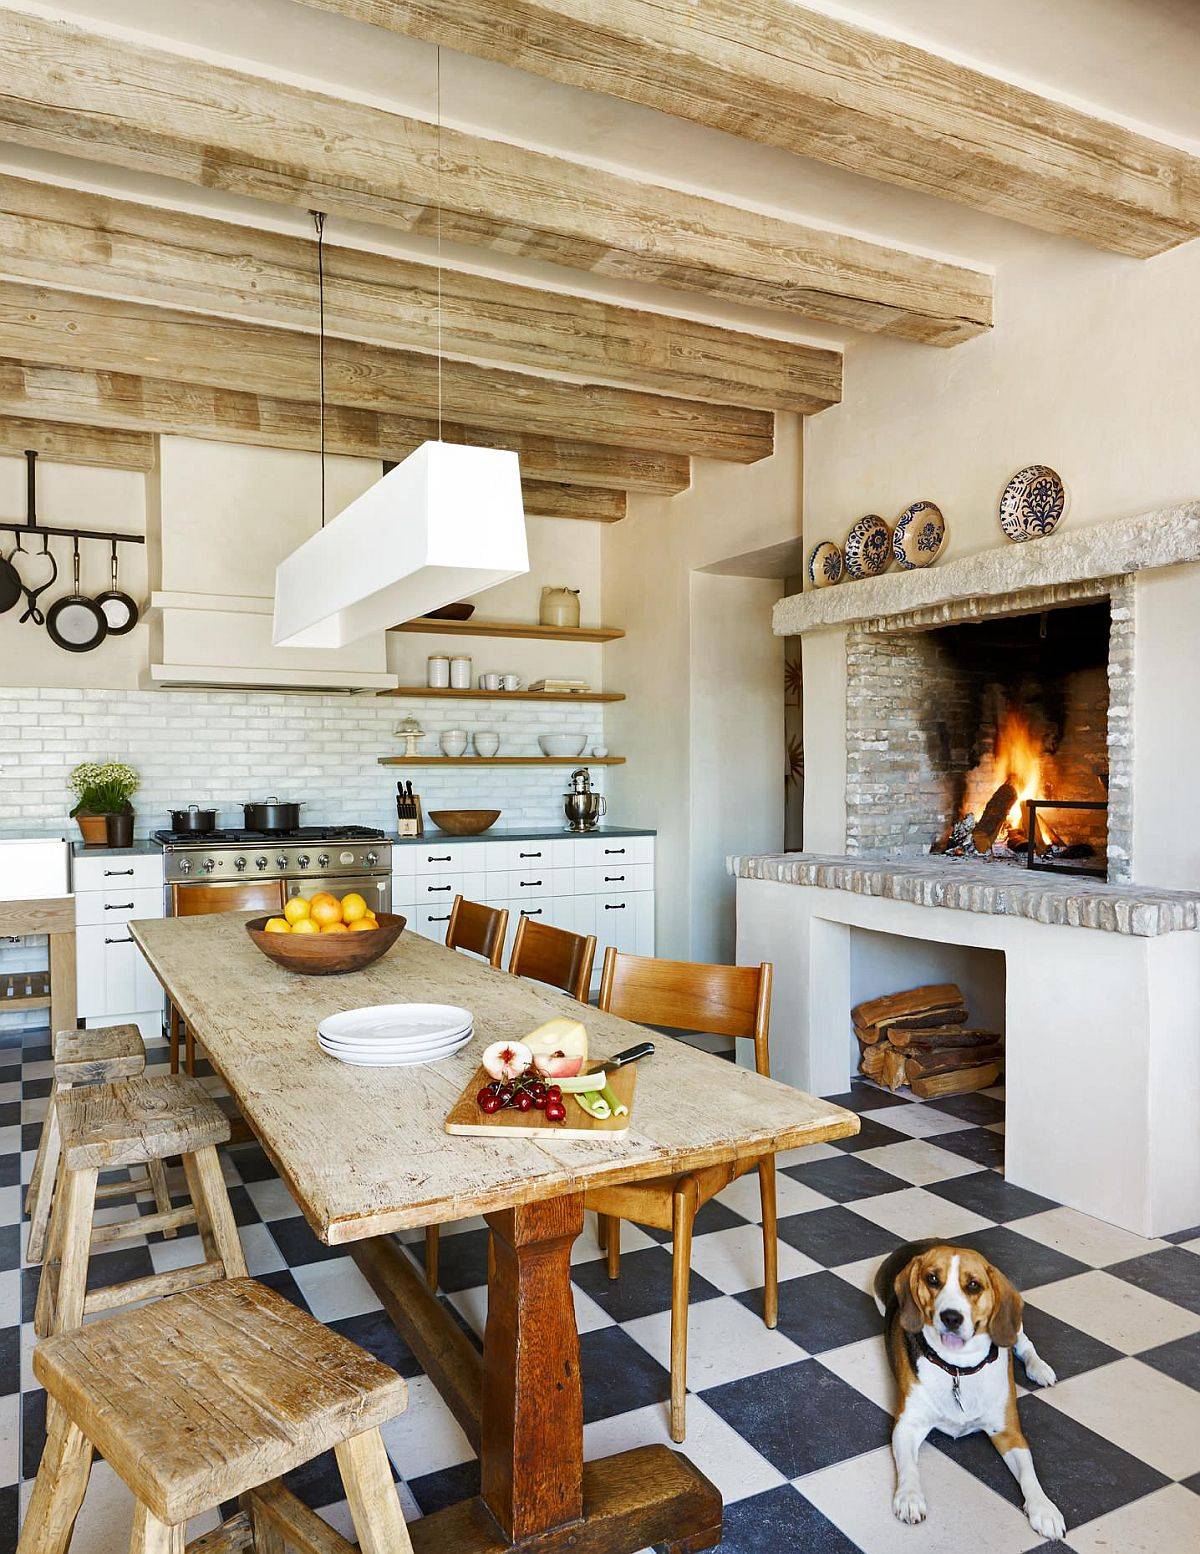 Rustic-eat-in-kitchen-with-Mediterranean-touches-exposed-ceiling-beams-and-a-fireplace-26901